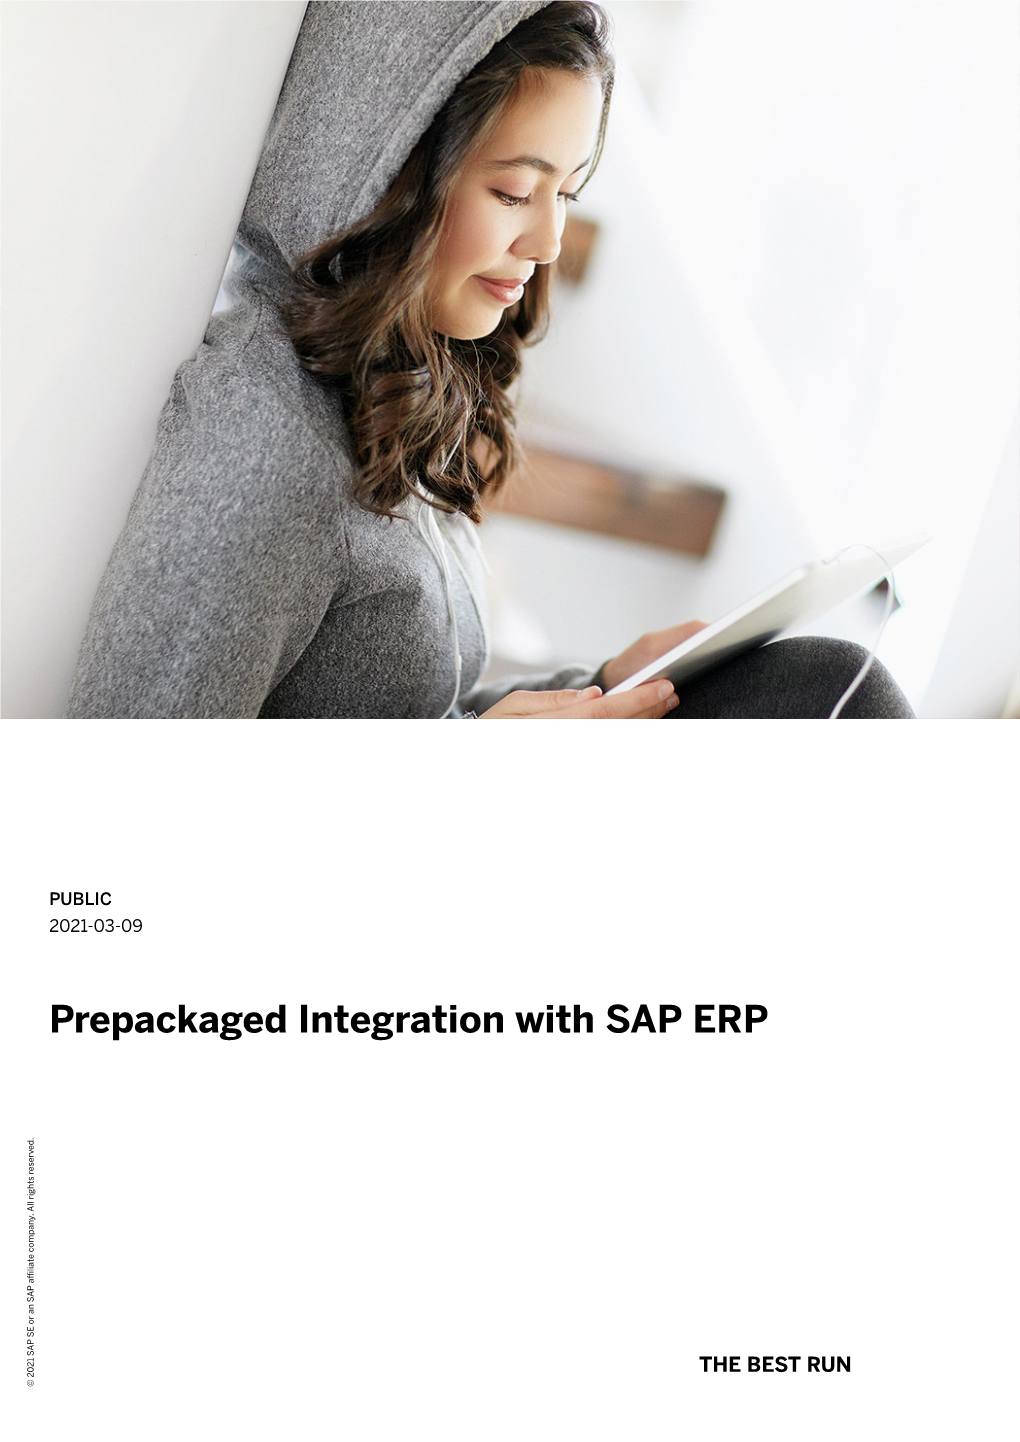 Prepackaged Integration with SAP ERP Company